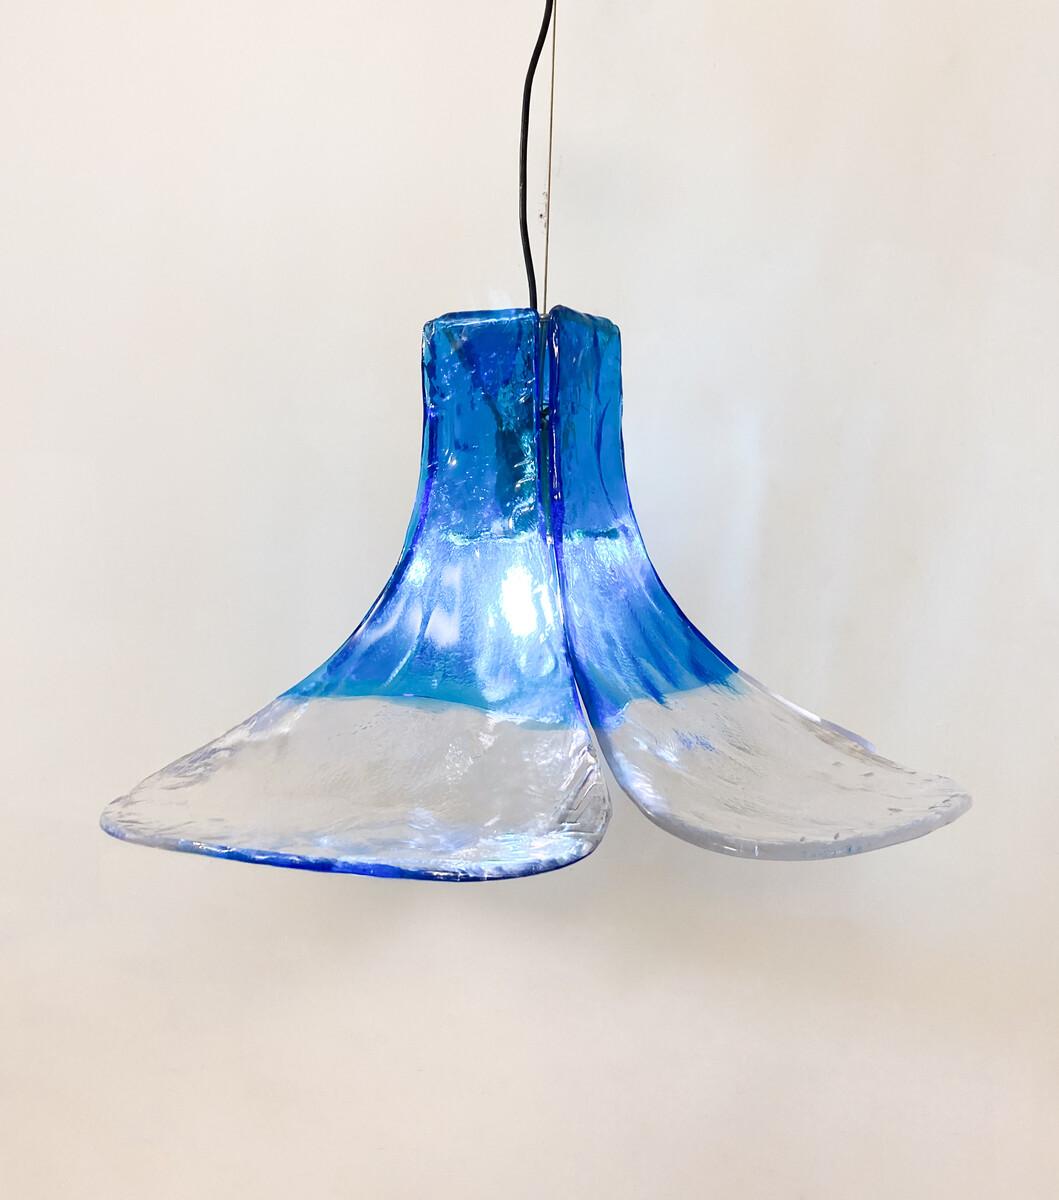 Mid-Century Murano Glass Hanging Lamp by Carlo Nason, 1960s - 2 available In Good Condition For Sale In Brussels, BE